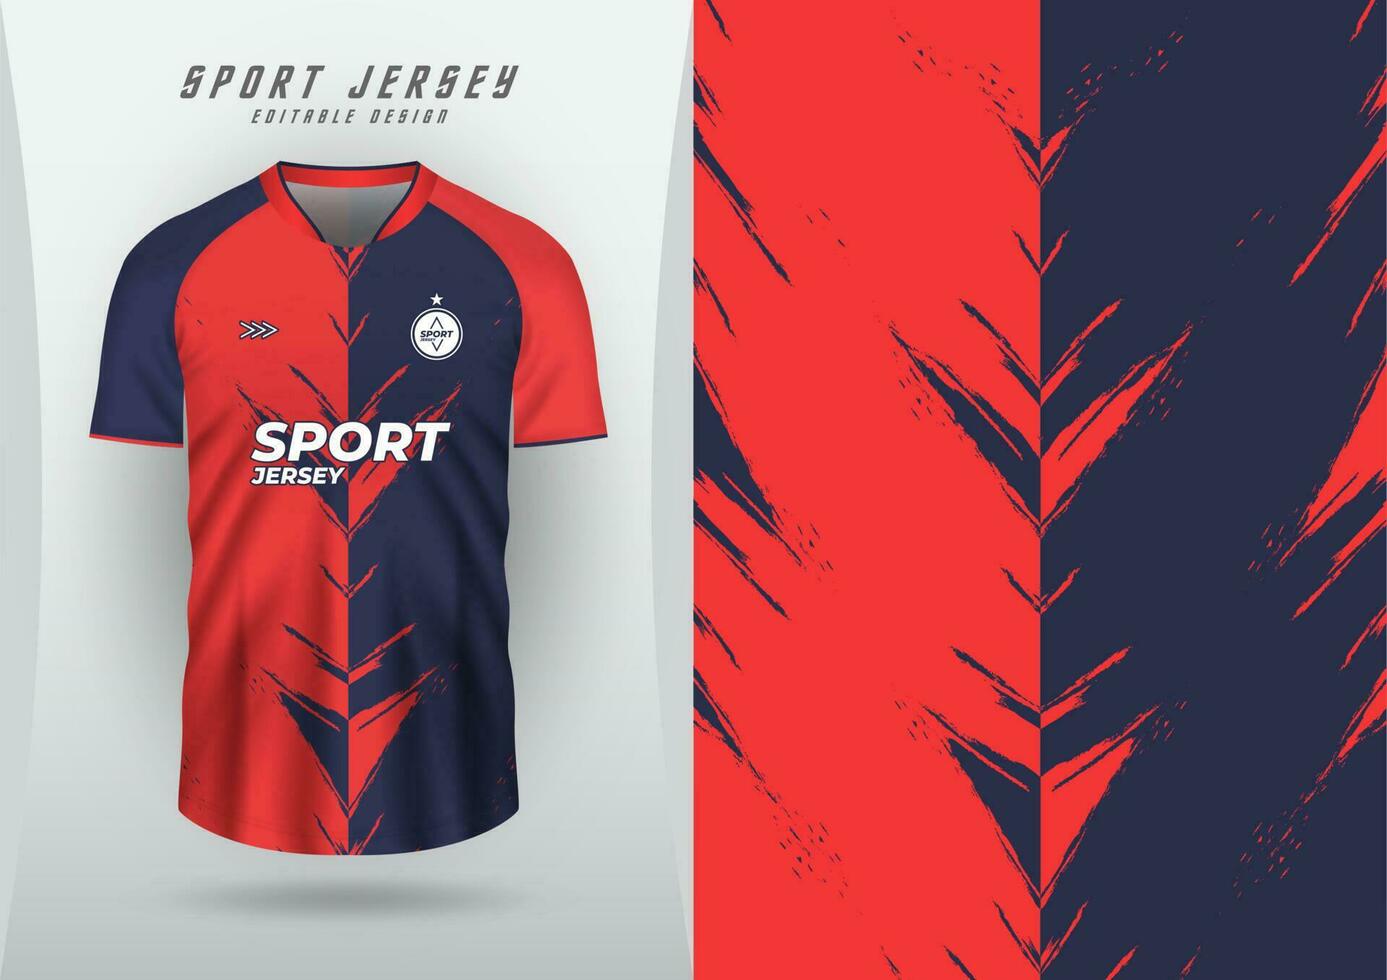 Backgrounds for sports jersey, soccer jerseys, running jerseys, racing jerseys, brush patterns, red and blue stripes vector